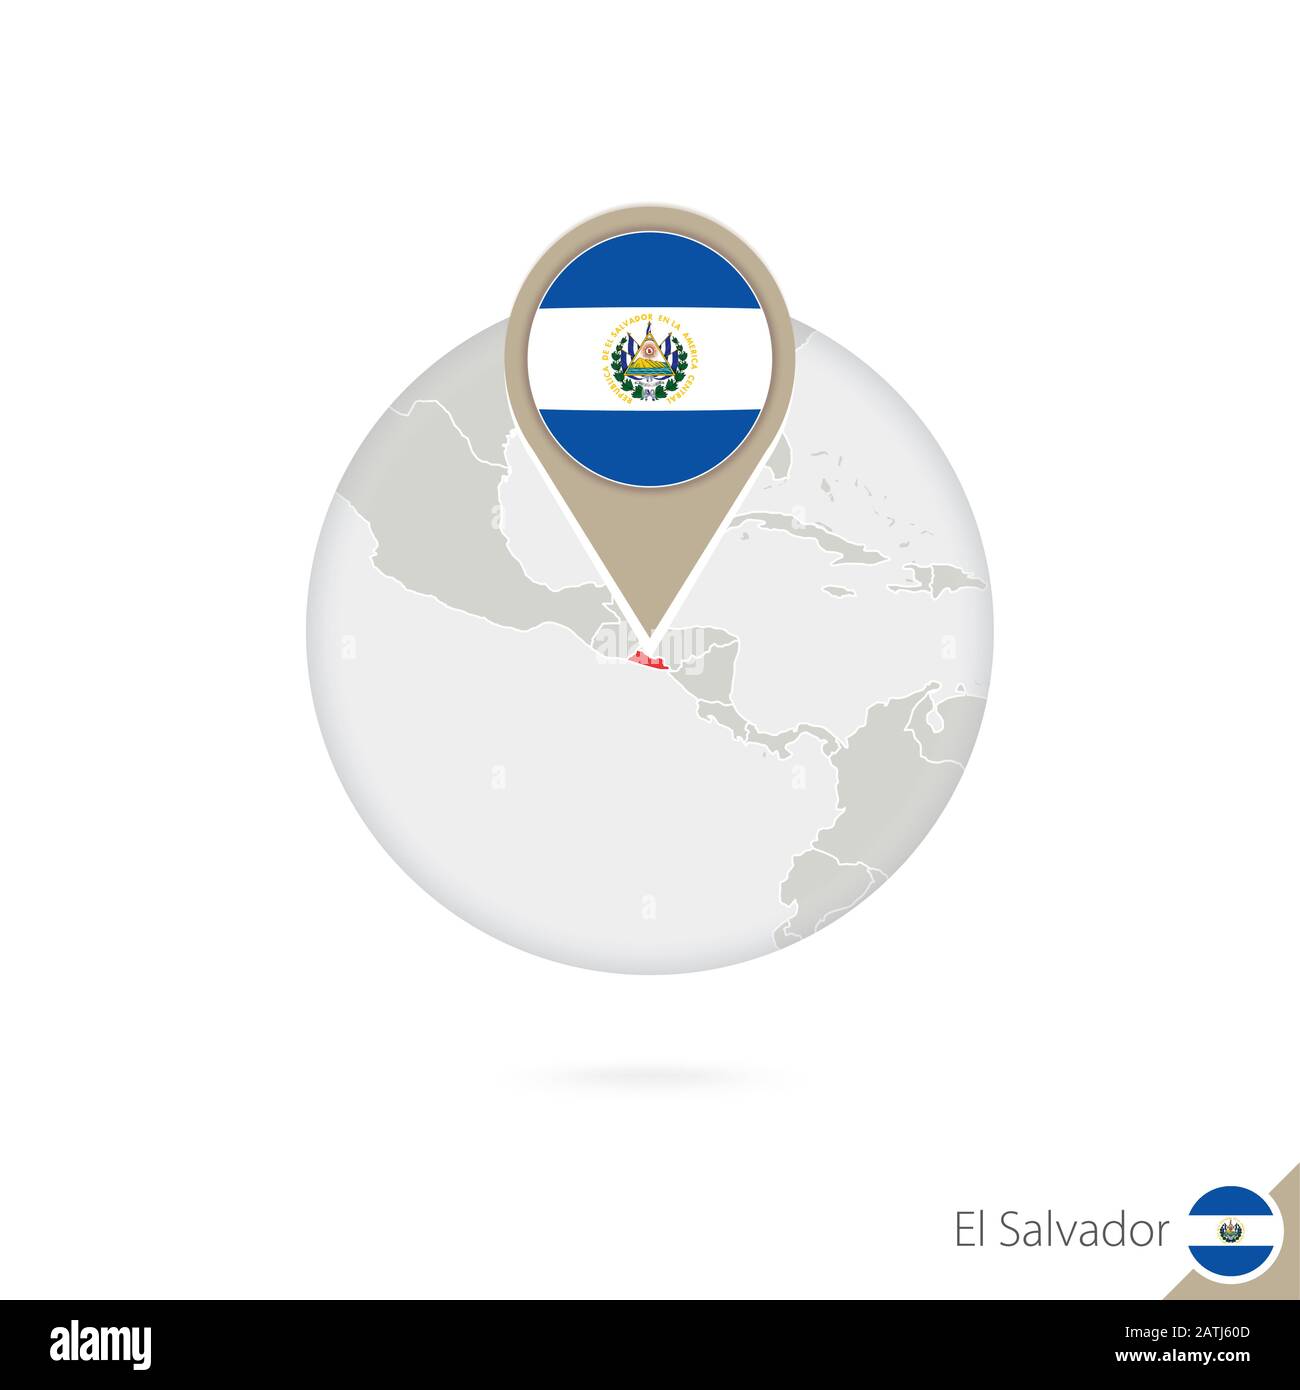 El Salvador map and flag in circle. Map of El Salvador, El Salvador flag pin. Map of El Salvador in the style of the globe. Vector Illustration. Stock Vector